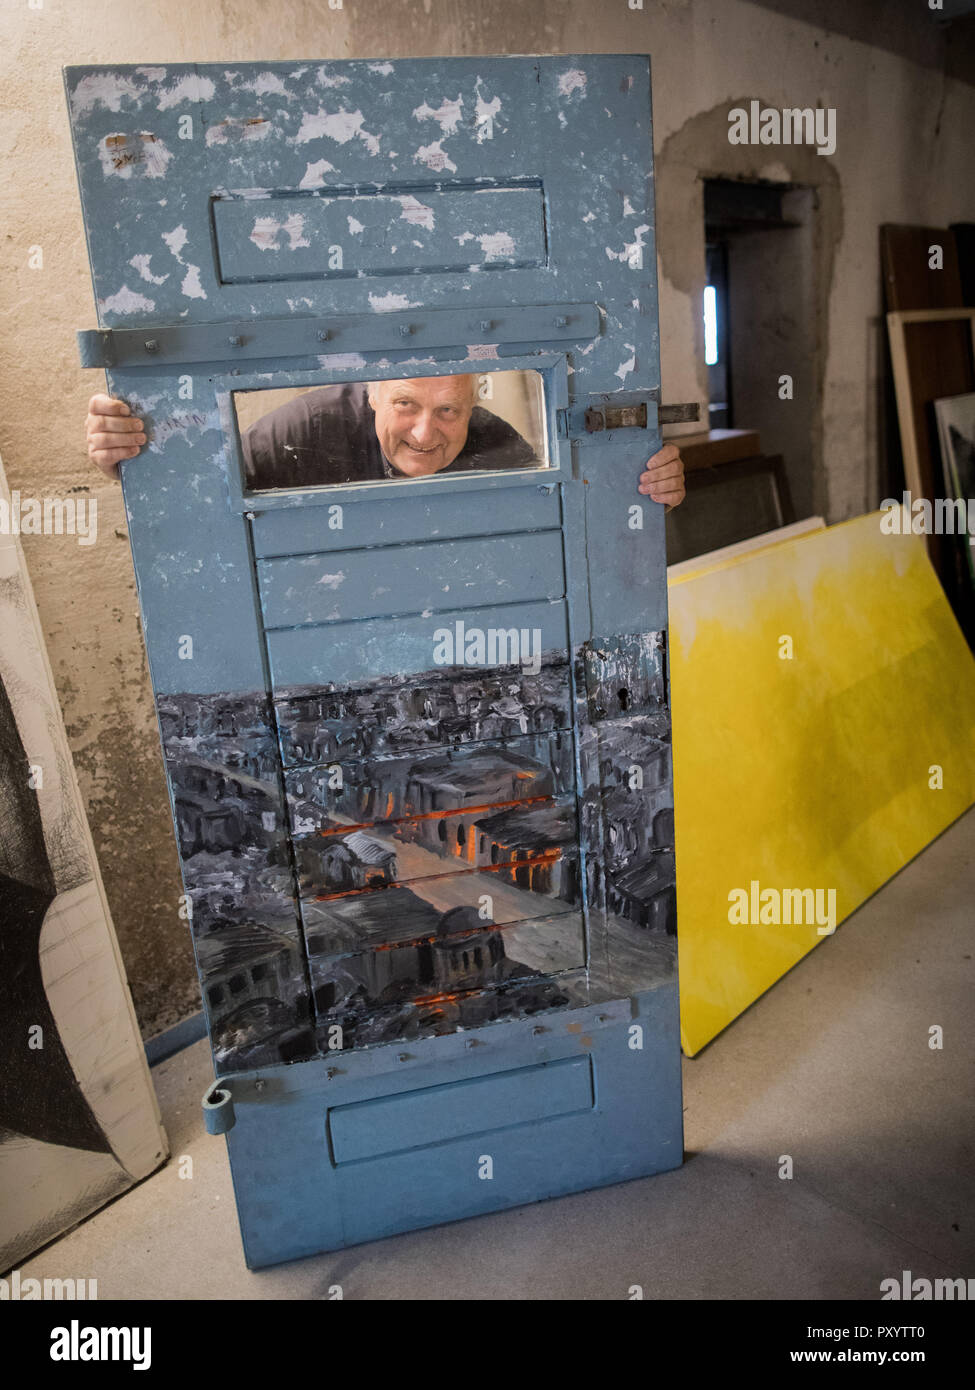 Kaarst, Germany. 23rd Oct, 2018. Helge Achenbach, former art consultant, looks at the Kunsthof through a discarded prison door on which a depiction of the destroyed Syrian city of Aleppo is painted. Achenbach is committed to politically persecuted artists on the former farm on the Lower Rhine. Once an art consultant to the rich and beautiful, Achenbach had betrayed Berthold Albrecht, the Aldi heir who died in 2012, when he bought art and vintage cars at hidden surcharges, and had been sentenced to six years in prison. (to dpa-KORR of 25.10.2018) Credit: Rolf Vennenbernd/dpa/Alamy Live News Stock Photo